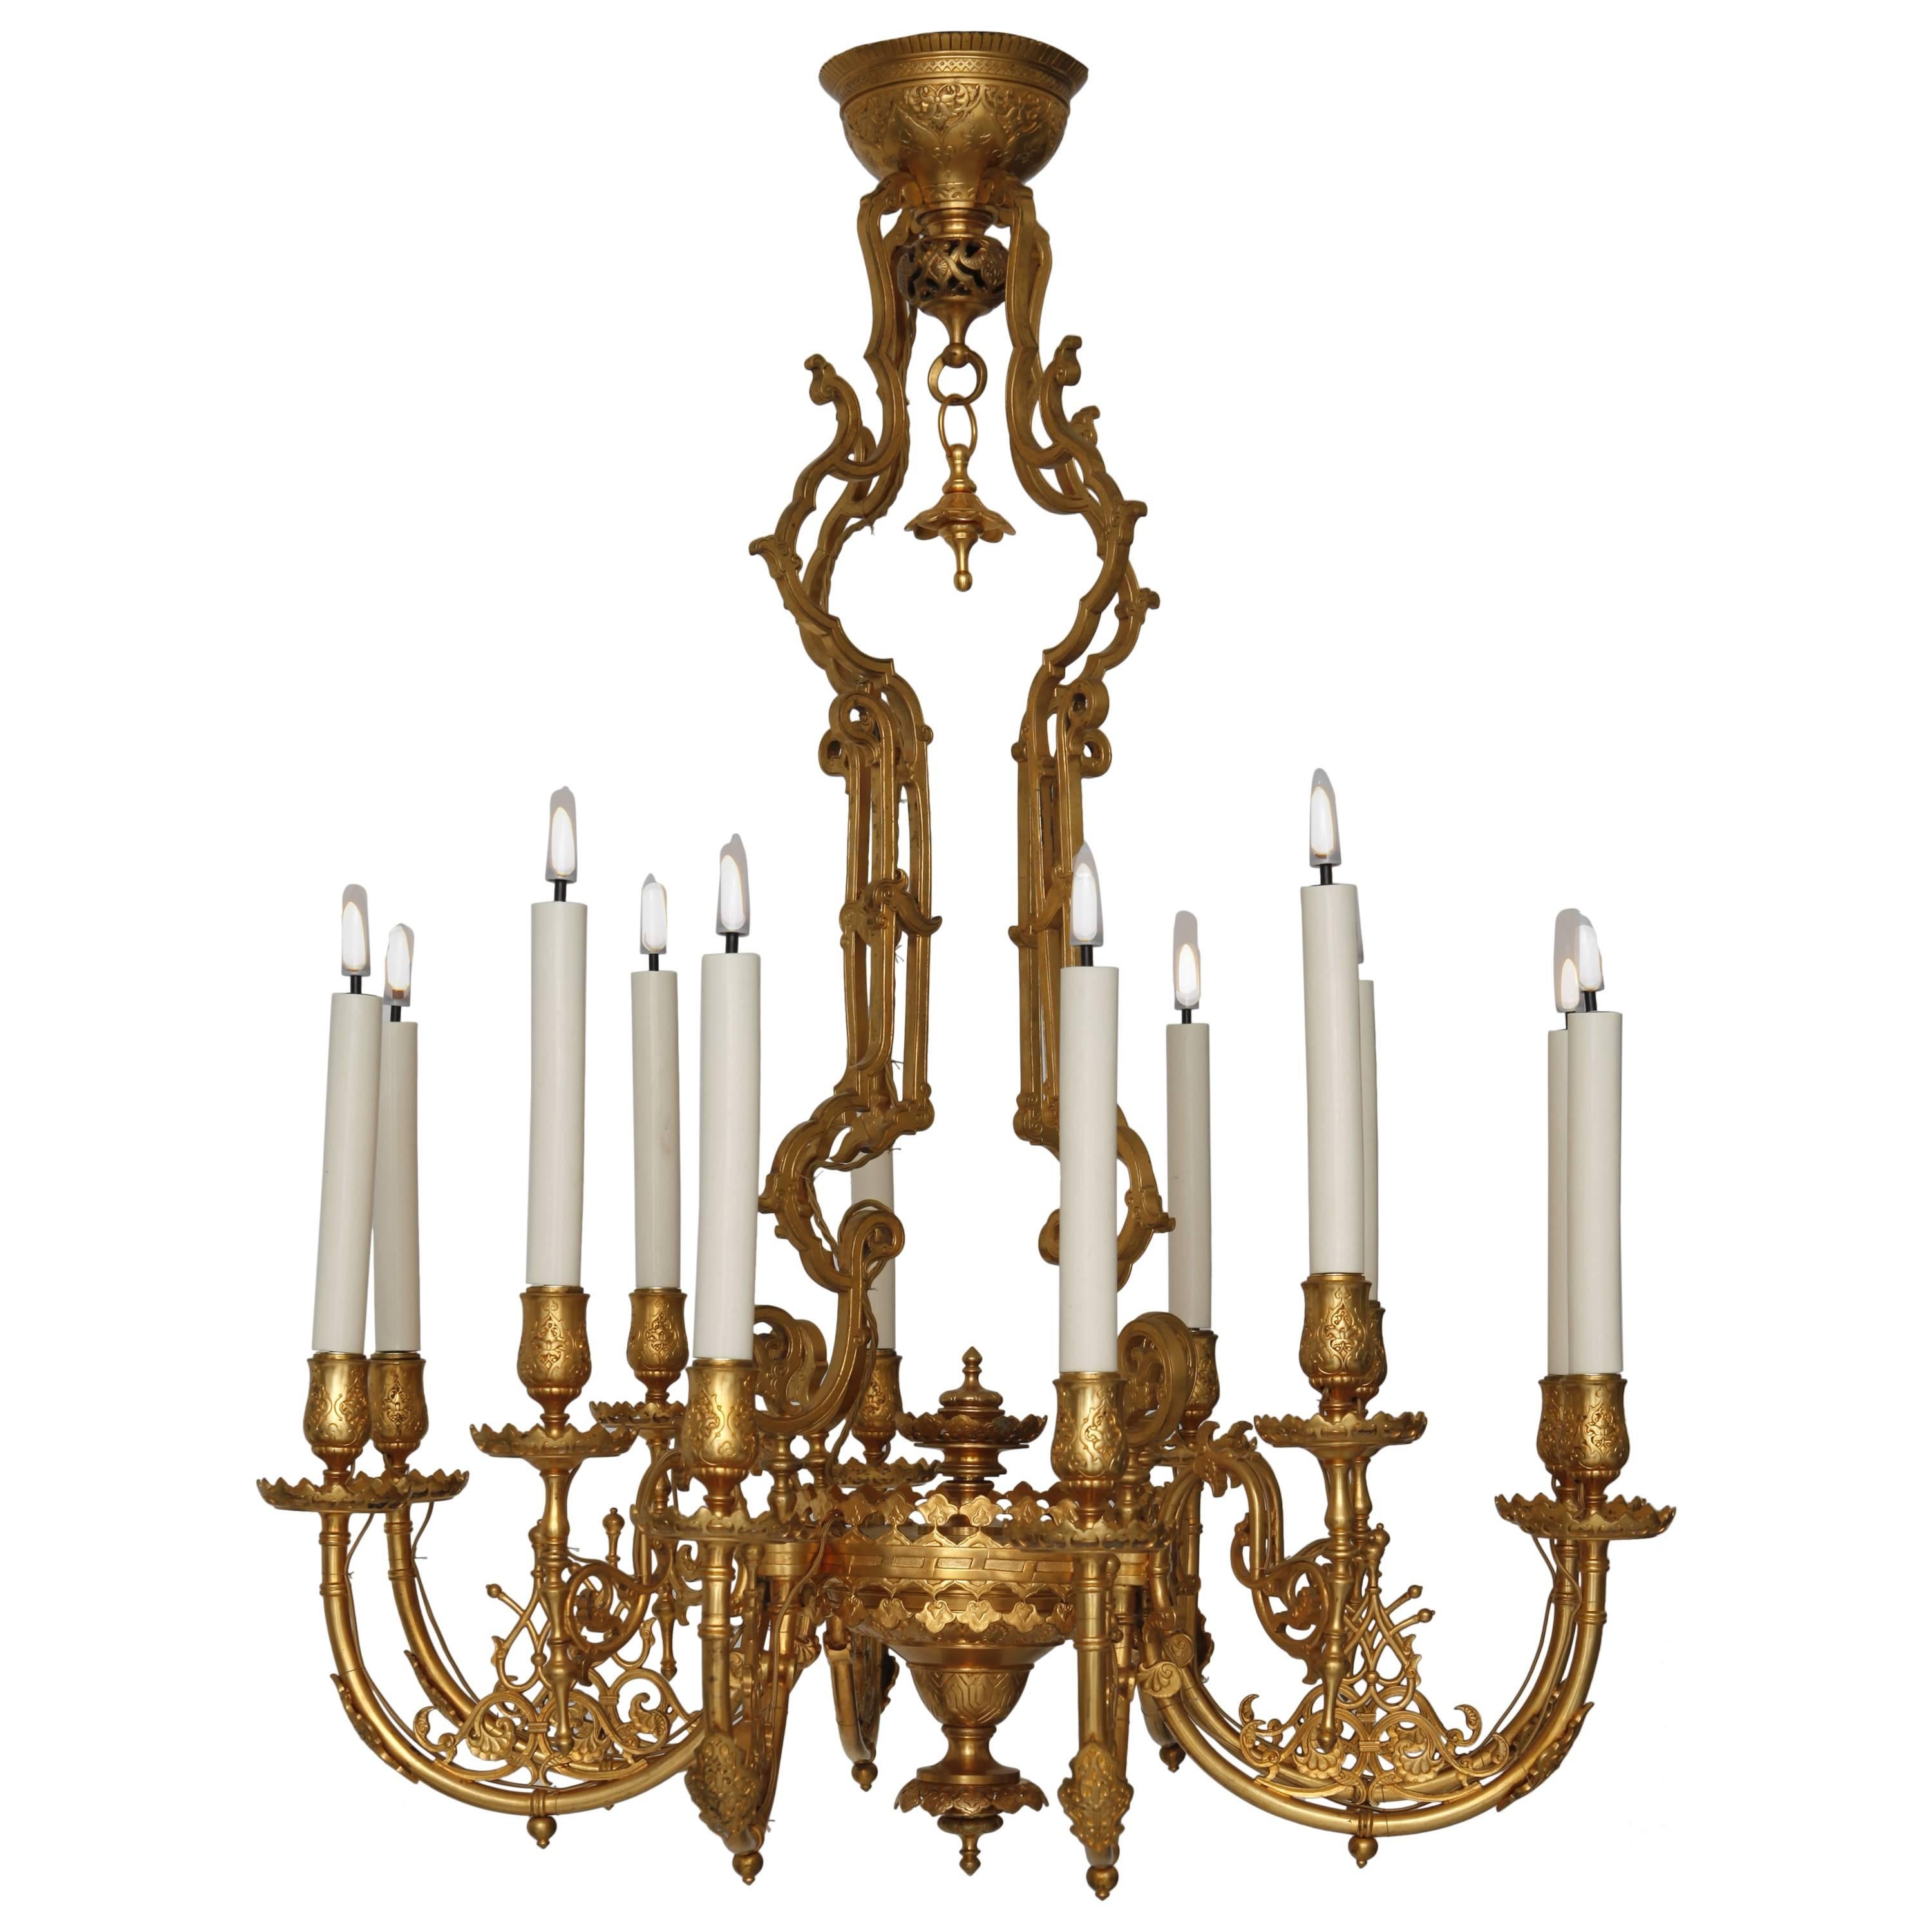 Japanese Influence, Gilded Bronze Chandelier For Sale